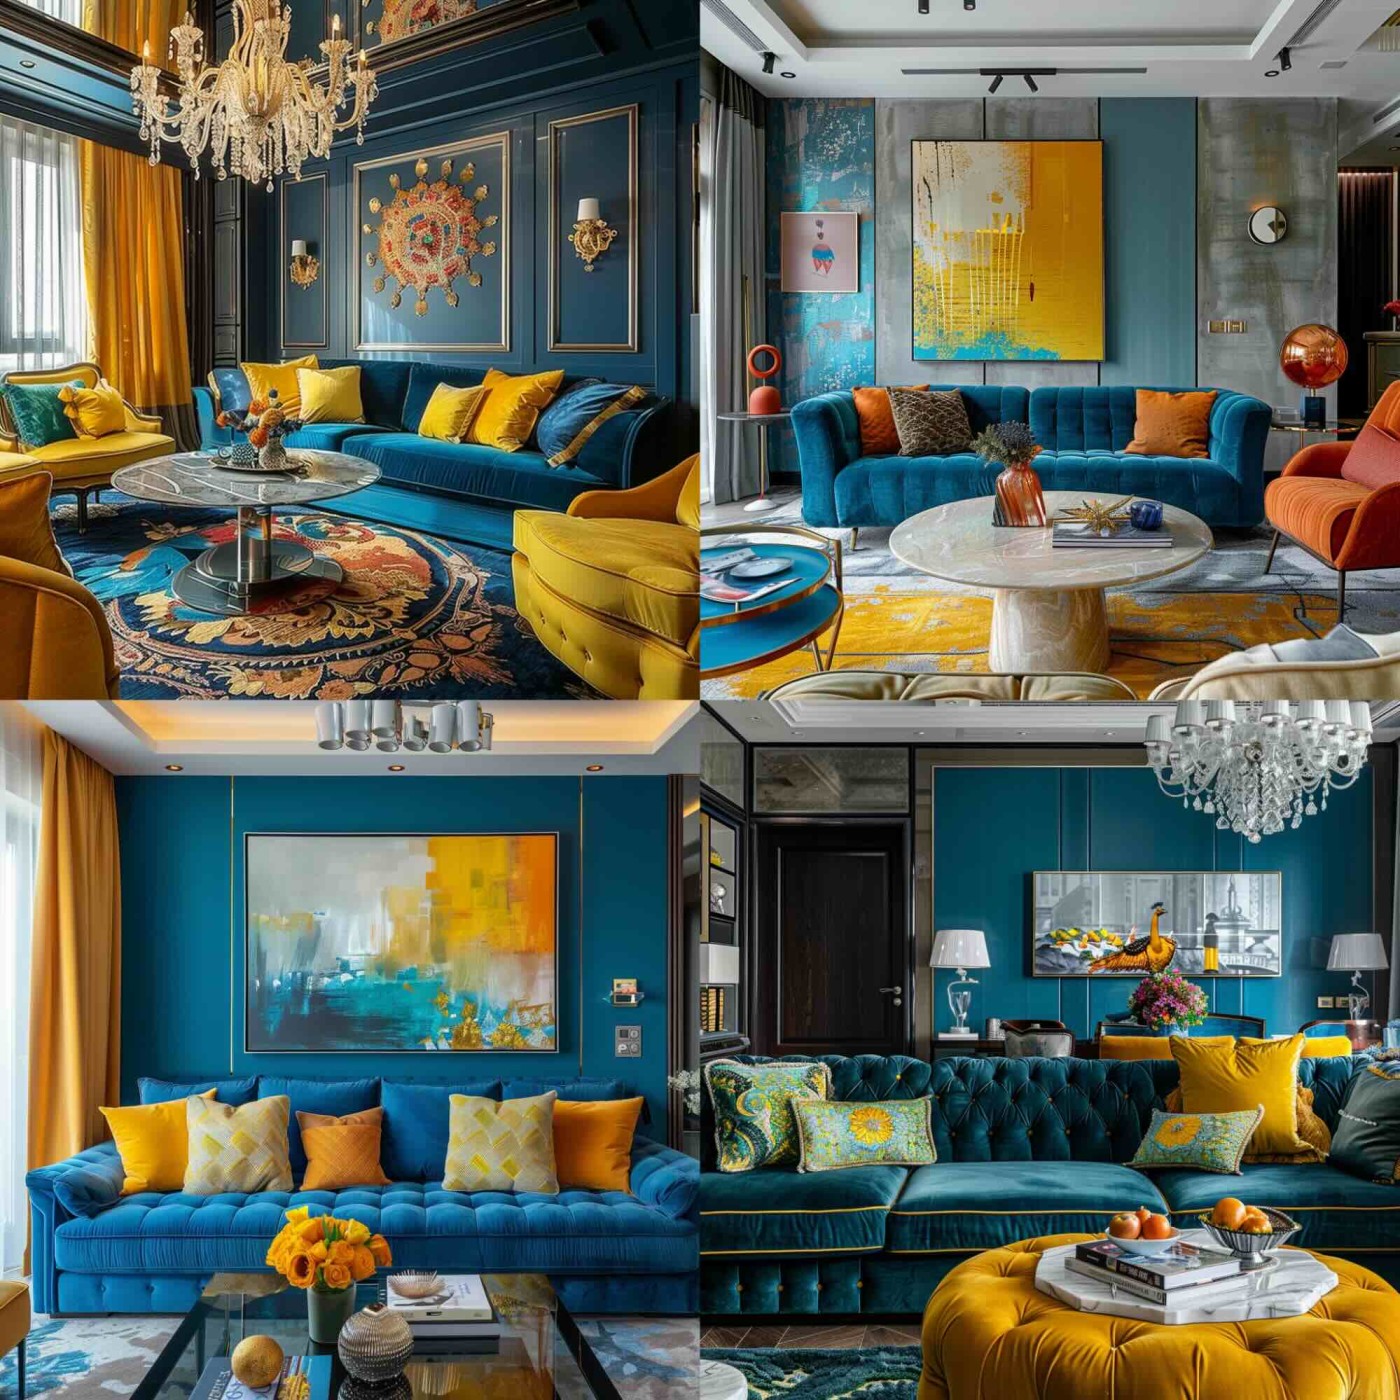 A living room in a luxury apartment, peacock blue and saffron yellow